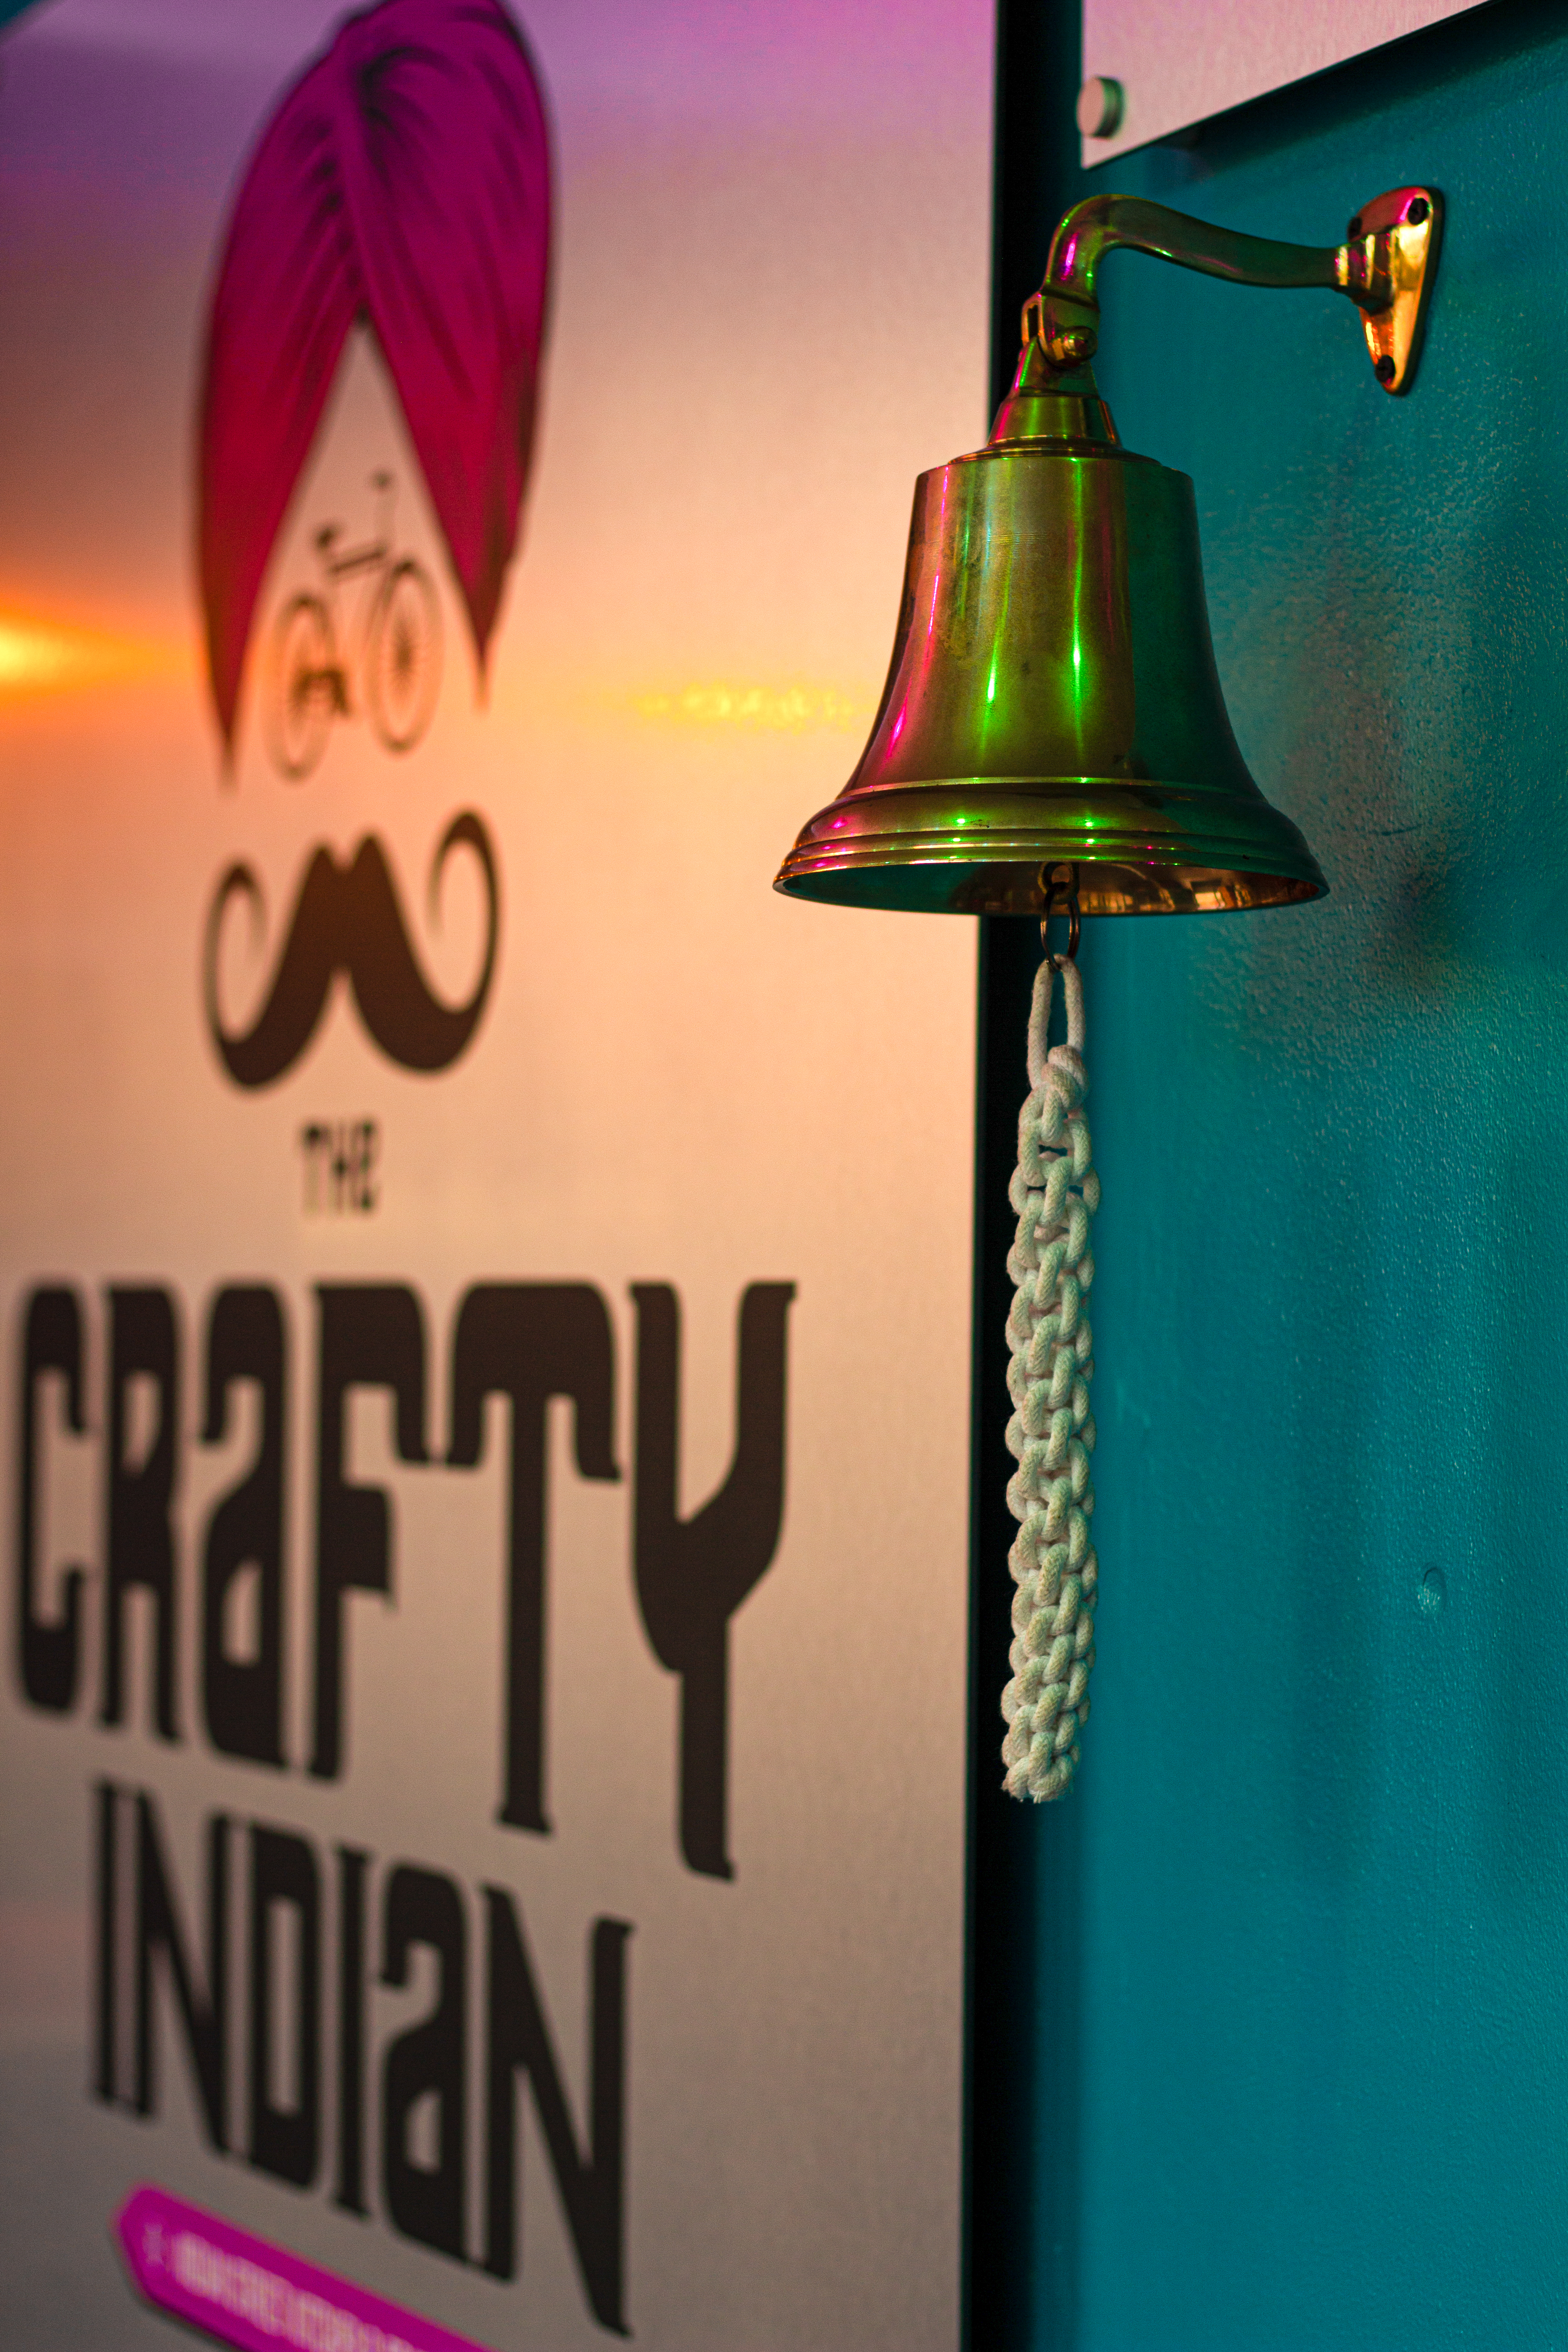 03.08- The Crafty Indian - Final Outcome -37